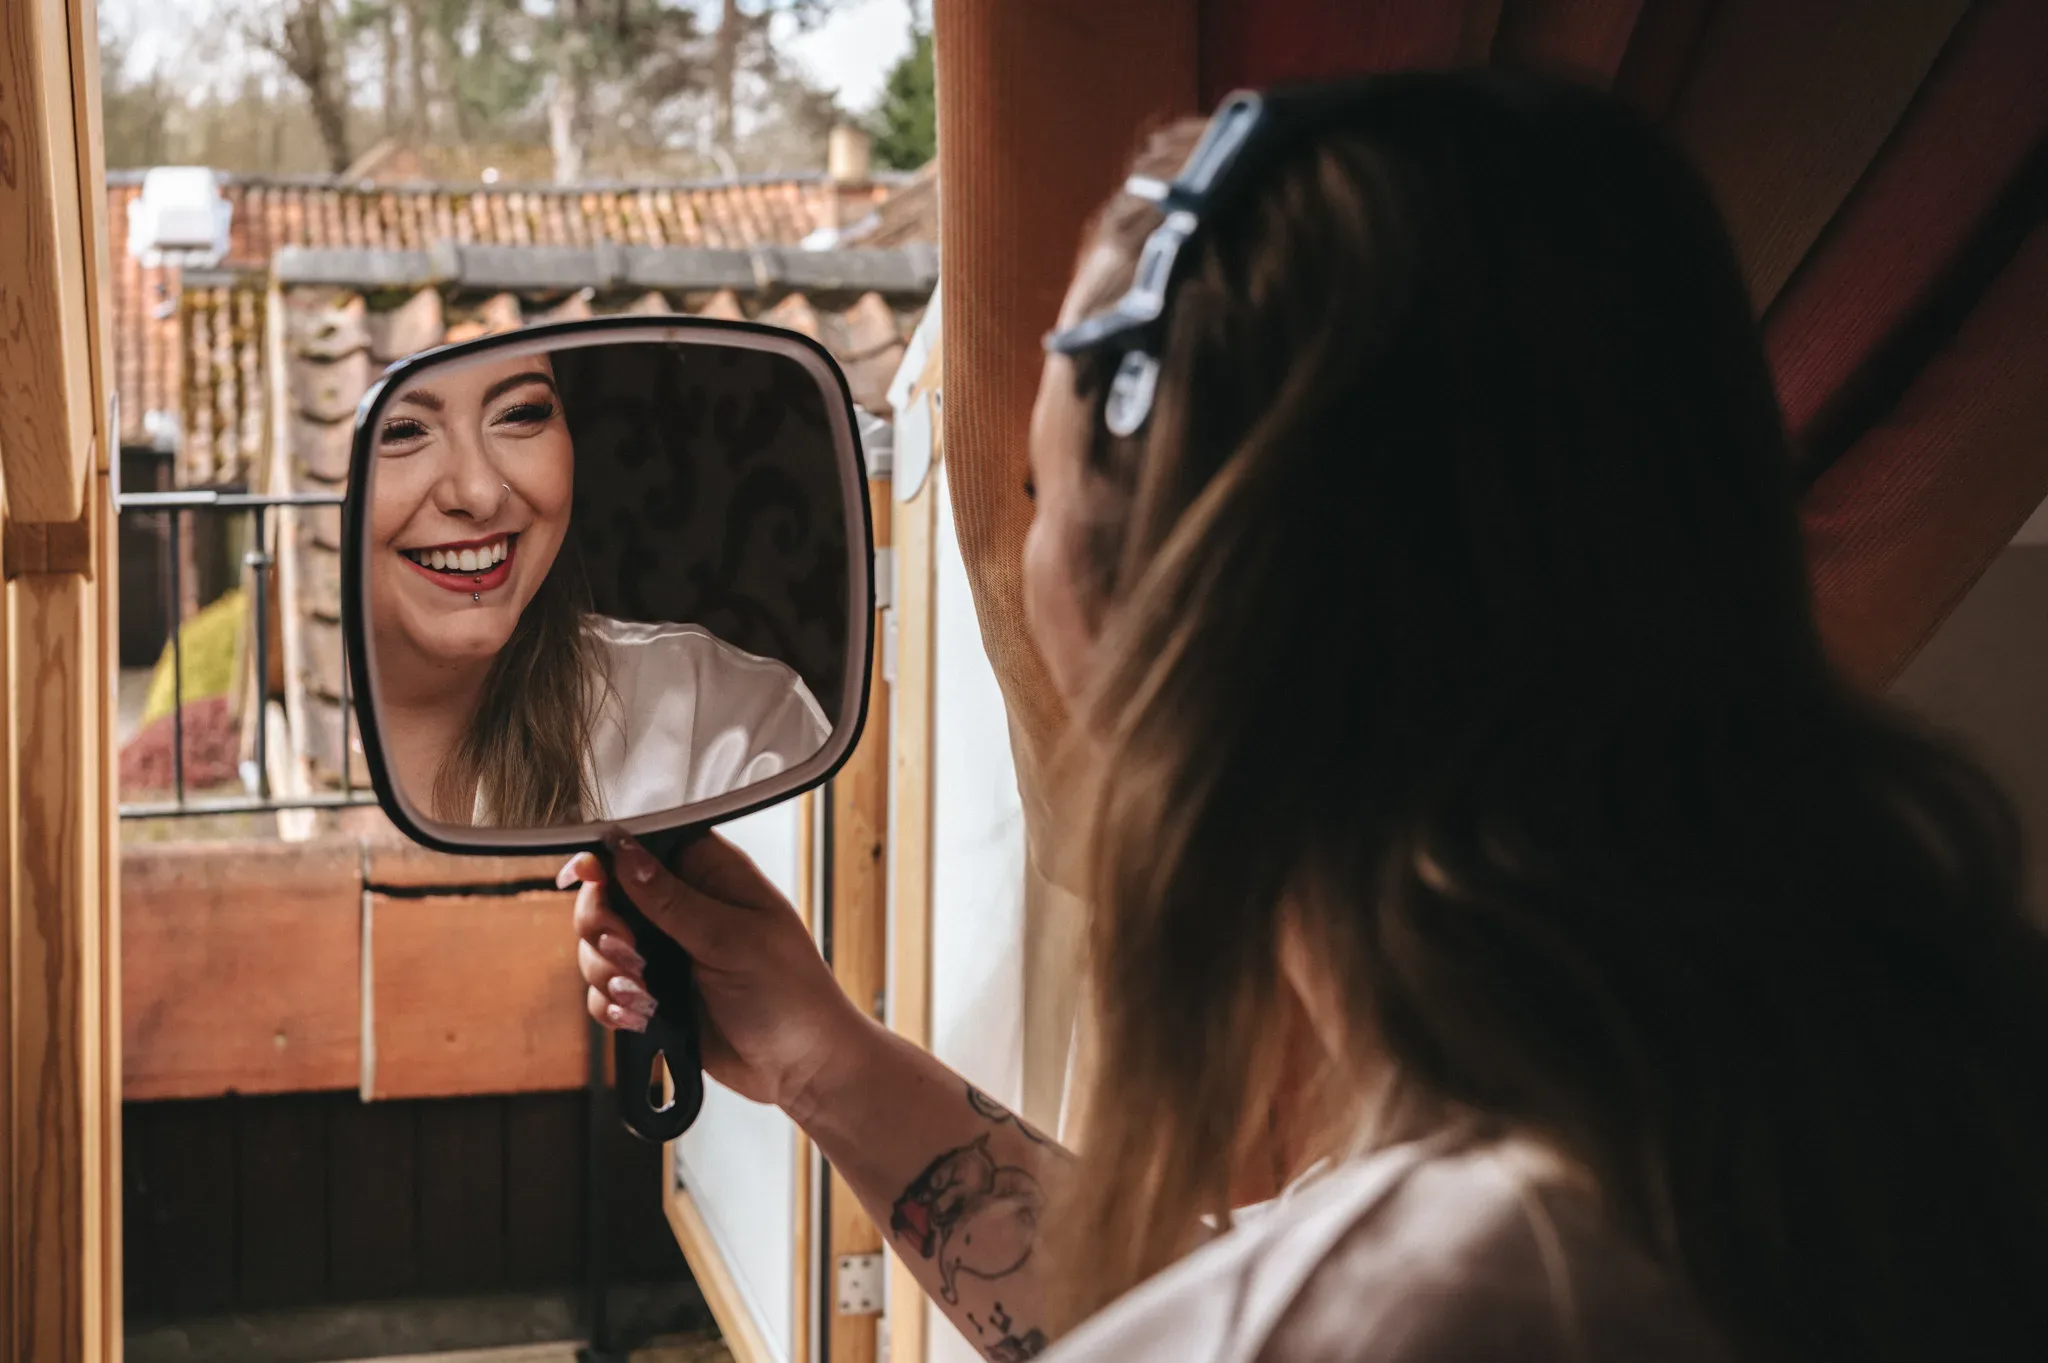 A cheerful woman with sunglasses and a tattoo enjoys her reflection in a hand-held mirror, capturing a moment of happiness and self-appreciation.